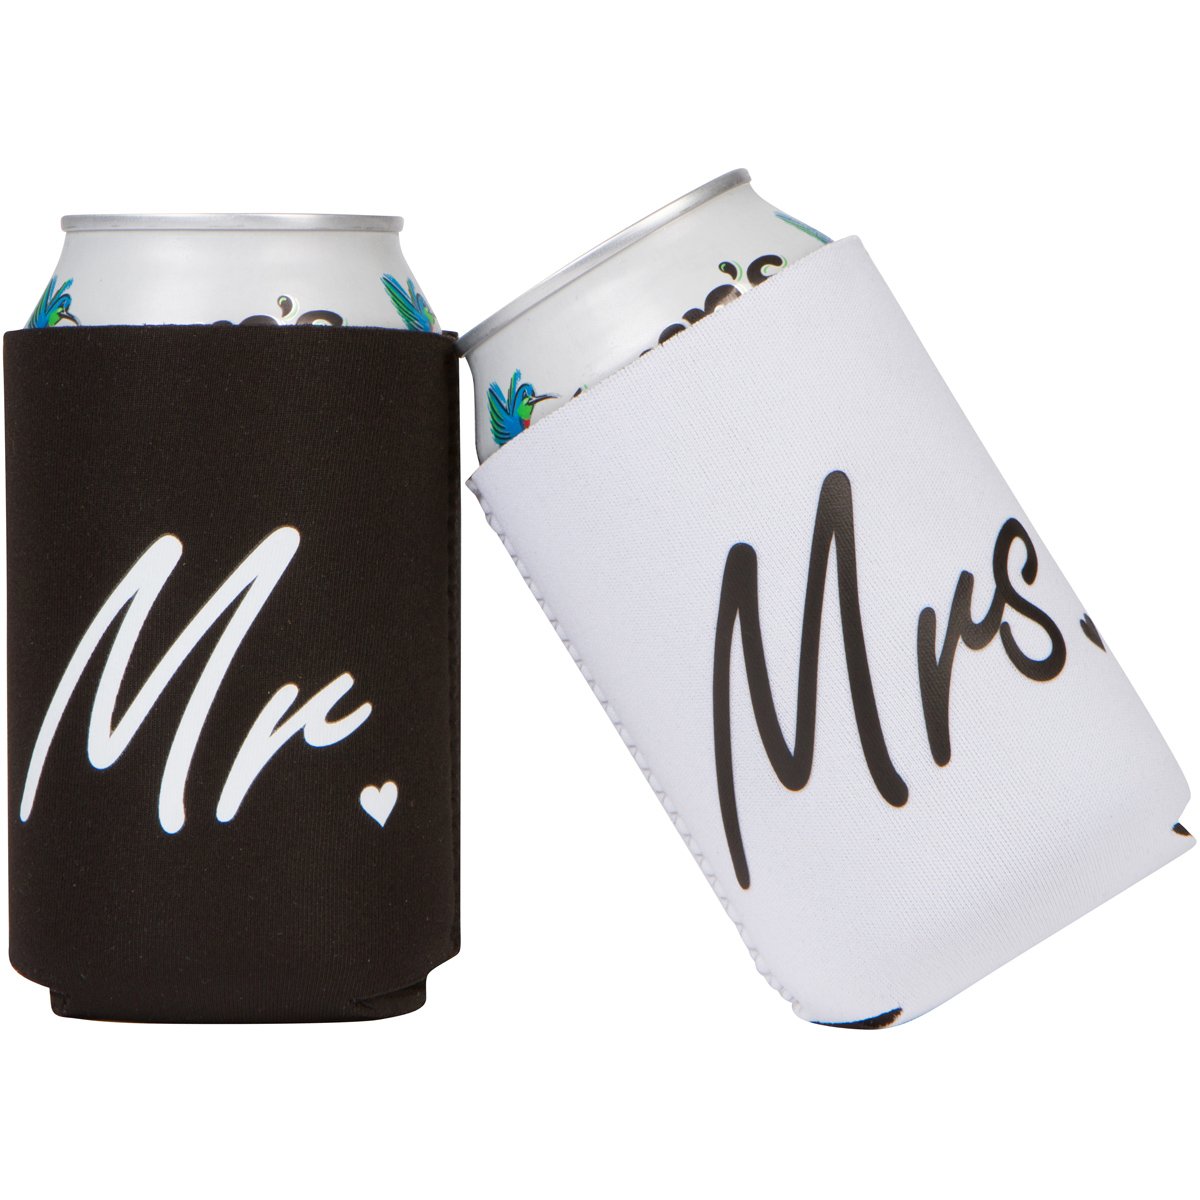 Cute Can Cooler Sets - Wedding Gift - Engagement Gift (Black/White - Mr and Mrs)